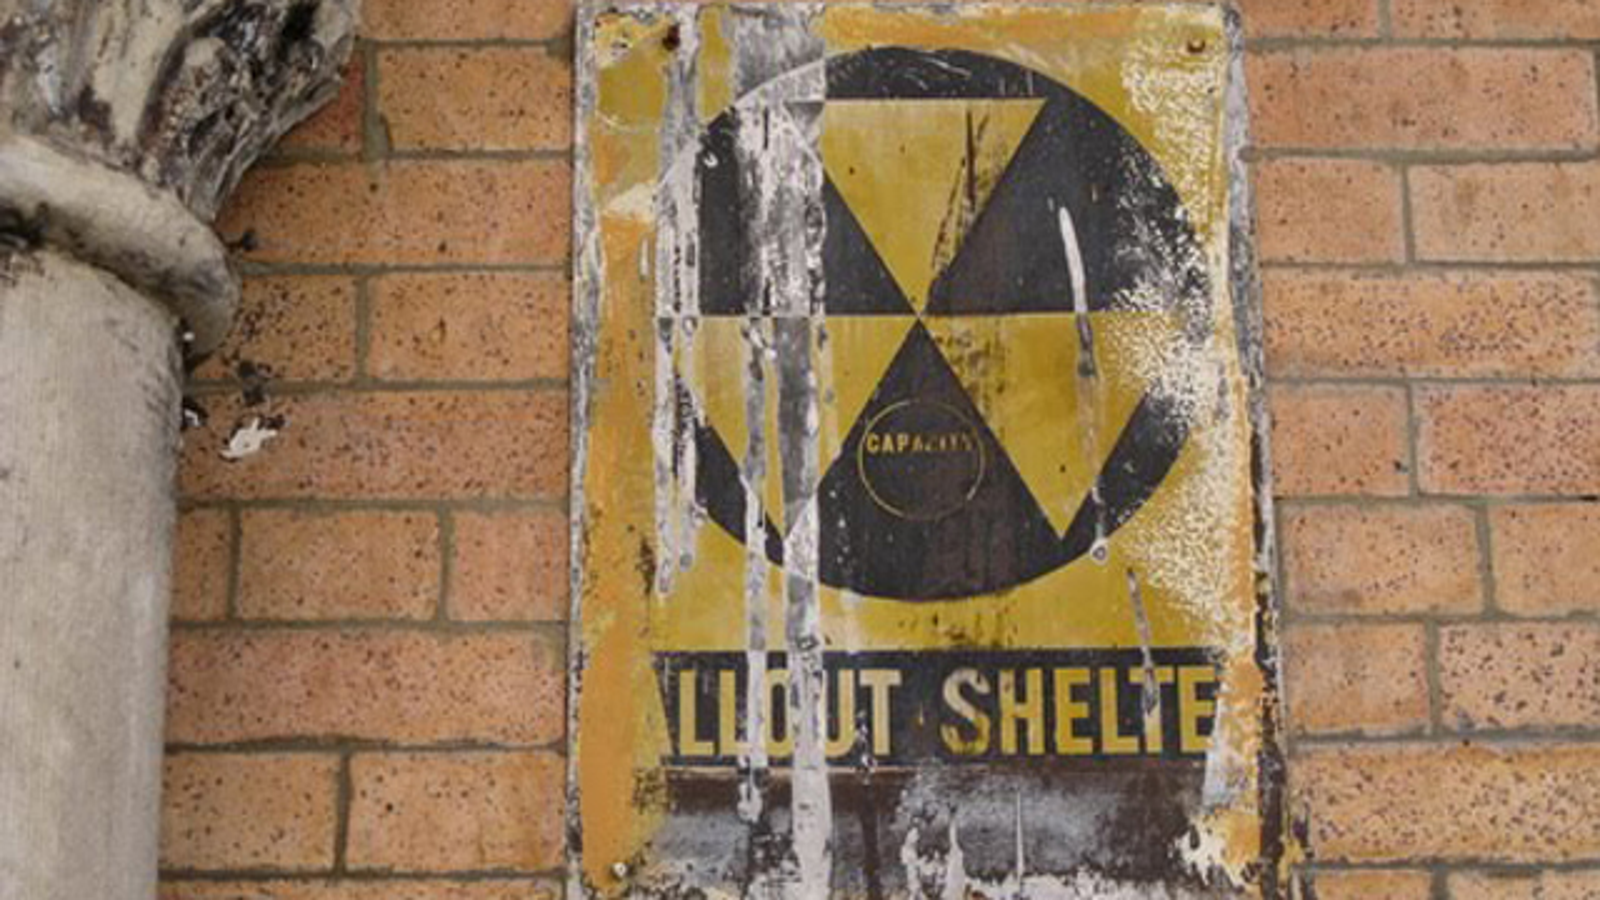 early fallout shelter signs